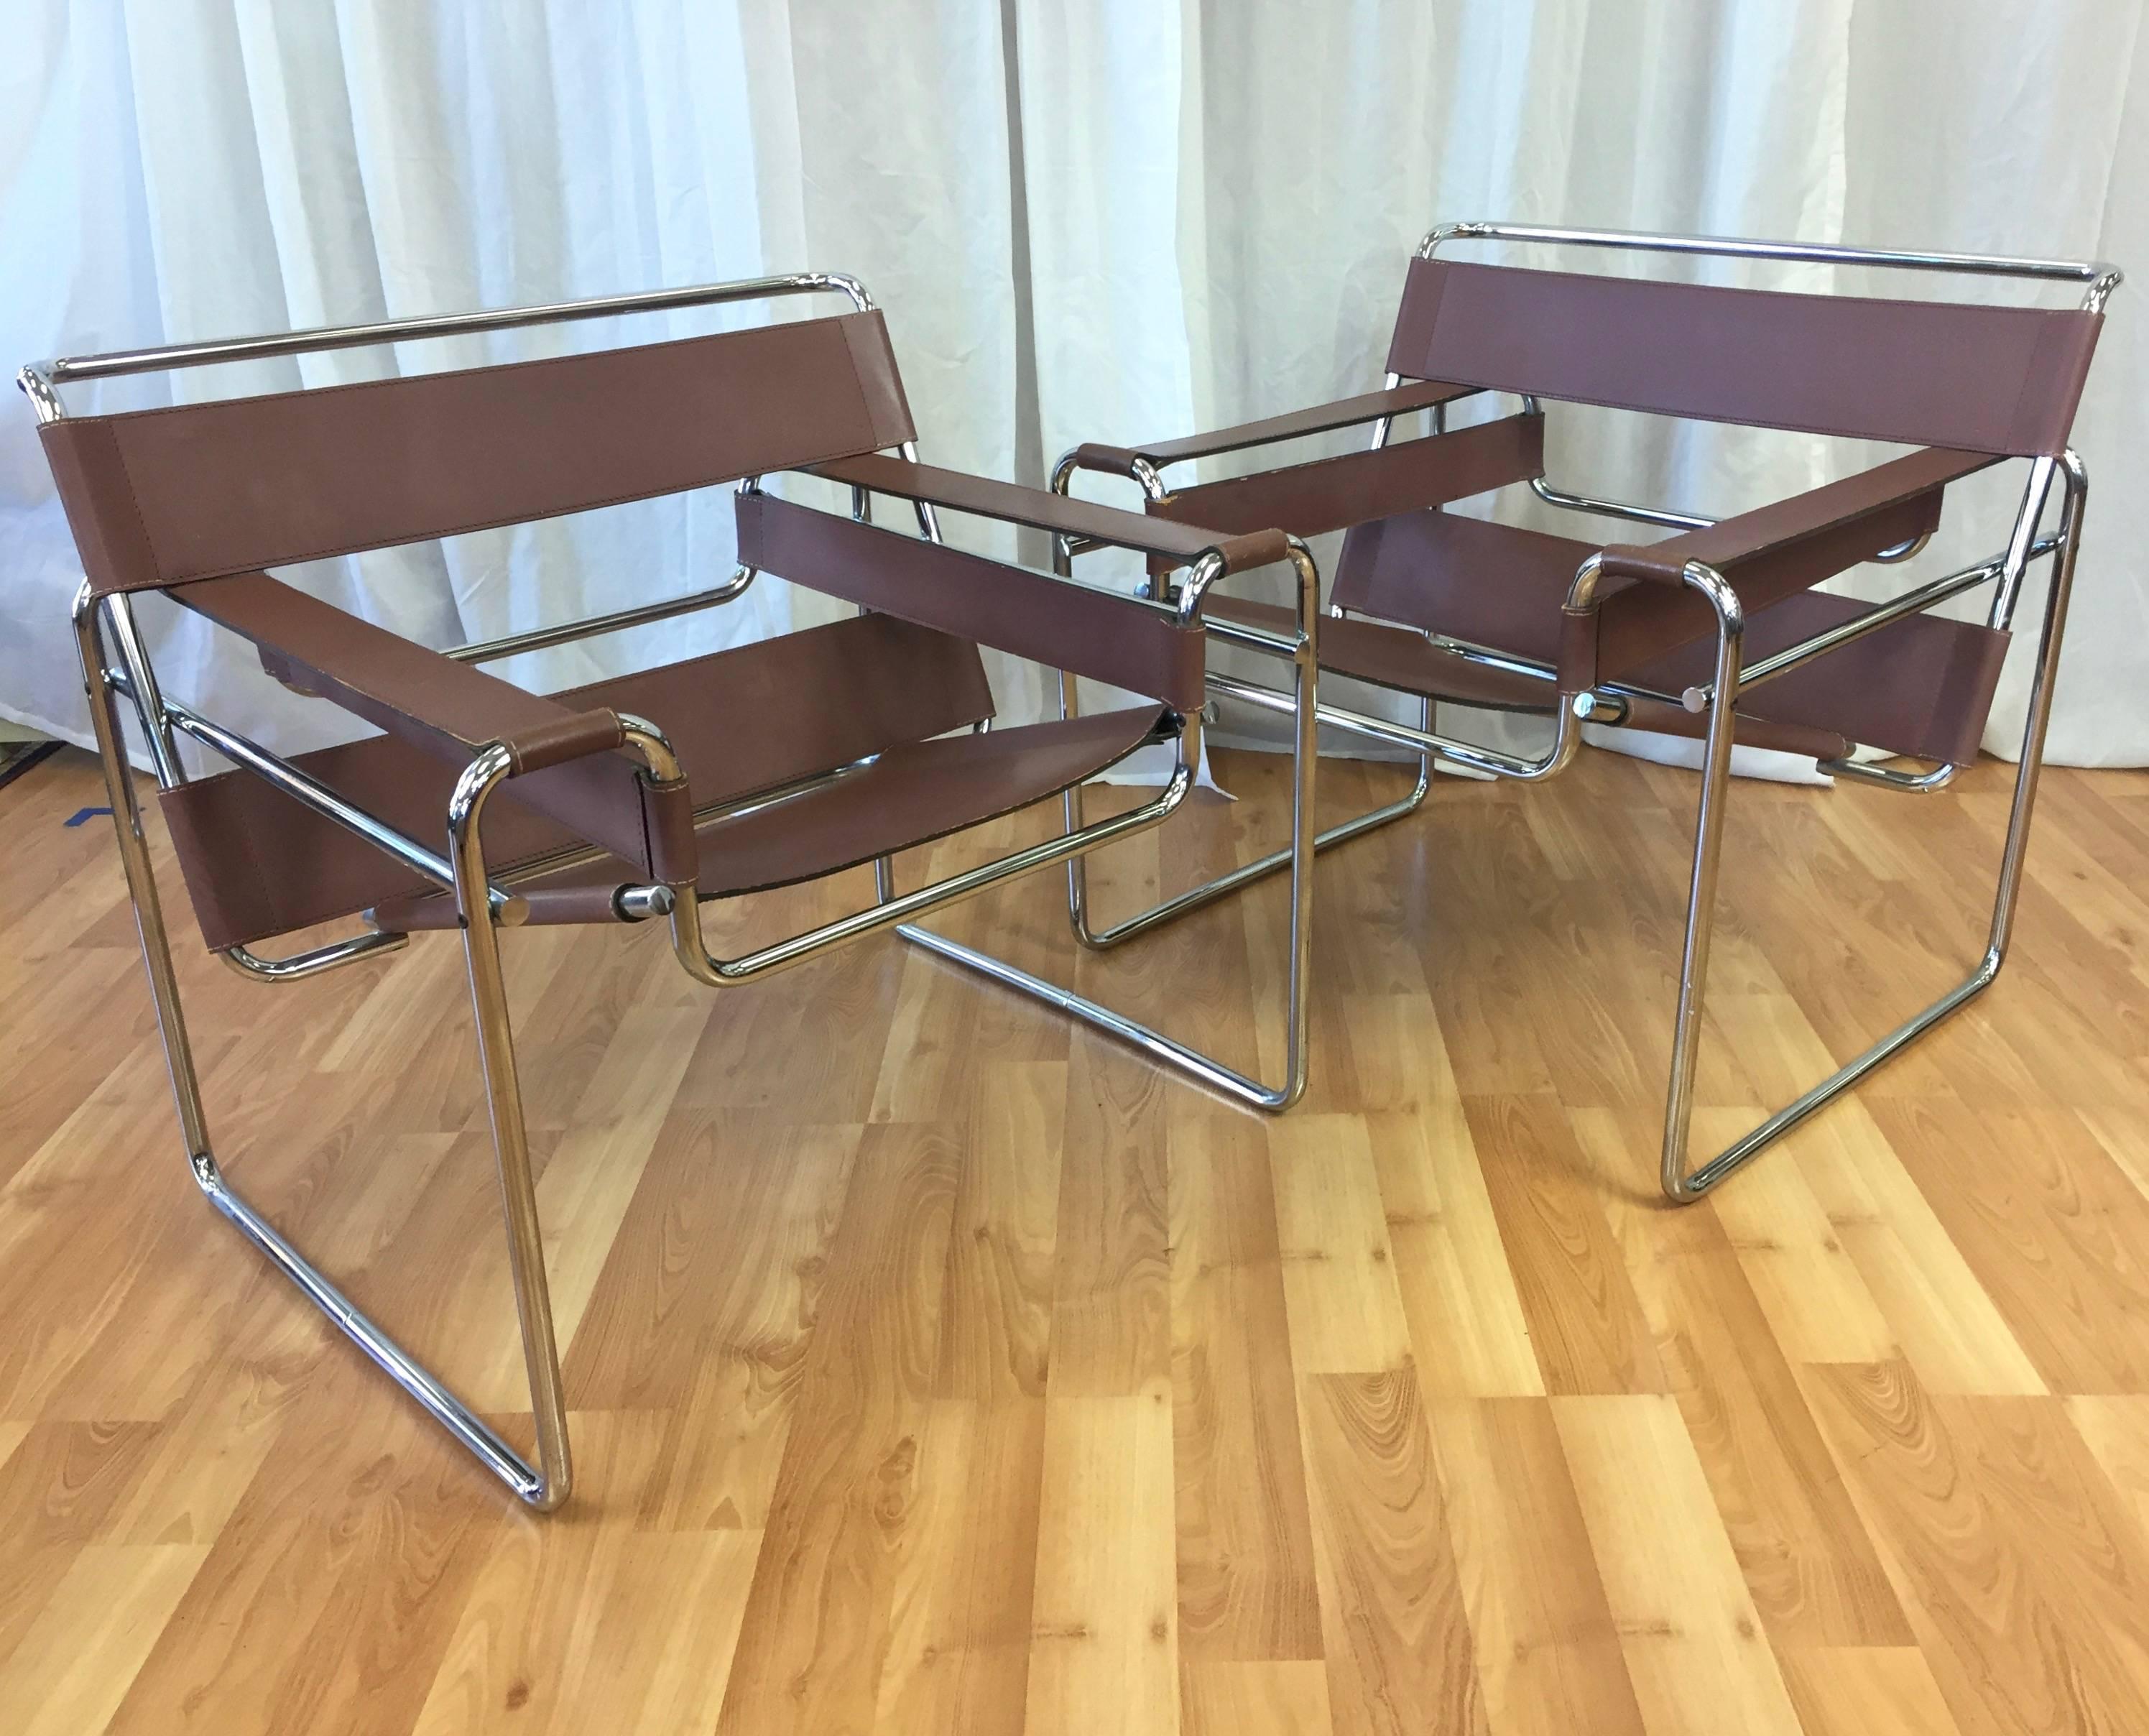 Italian Pair of Marcel Breuer “Wassily” Chairs by Gavina for Knoll